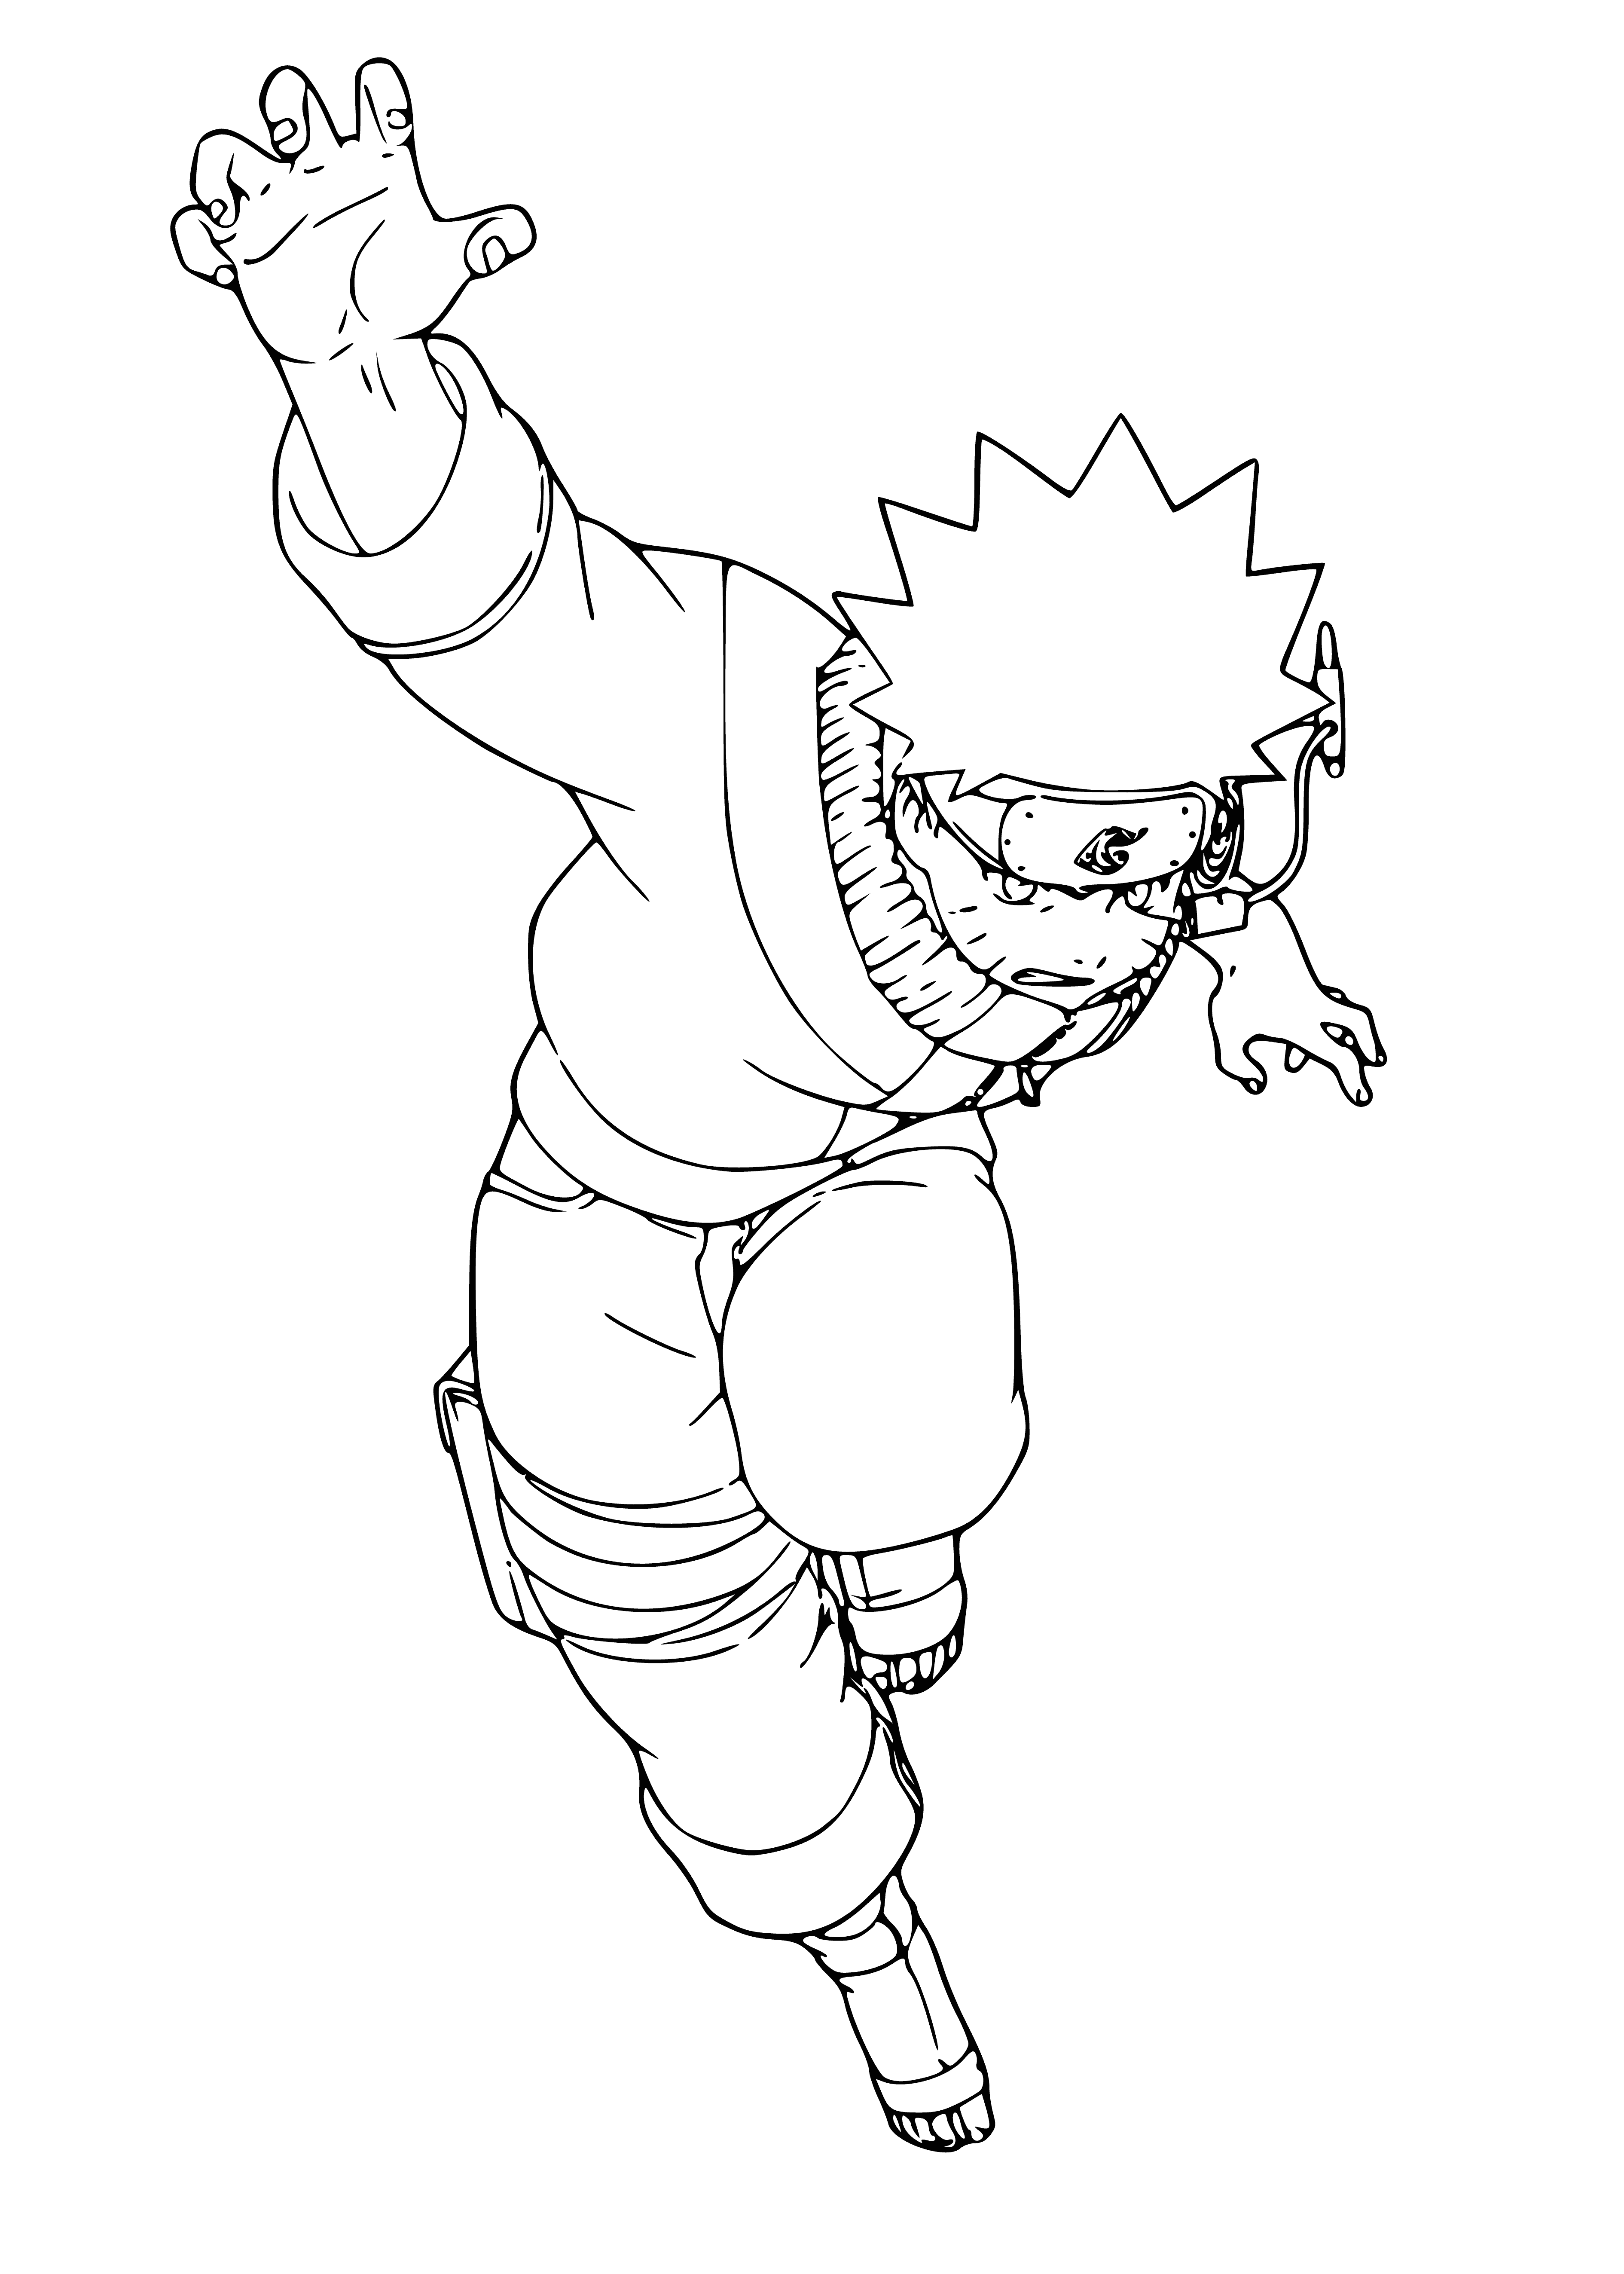 coloring page: Anime character Naruto stands with hands on hips in bright jumpsuit, spiky orange hair, blue eyes and small scar. #Naruto